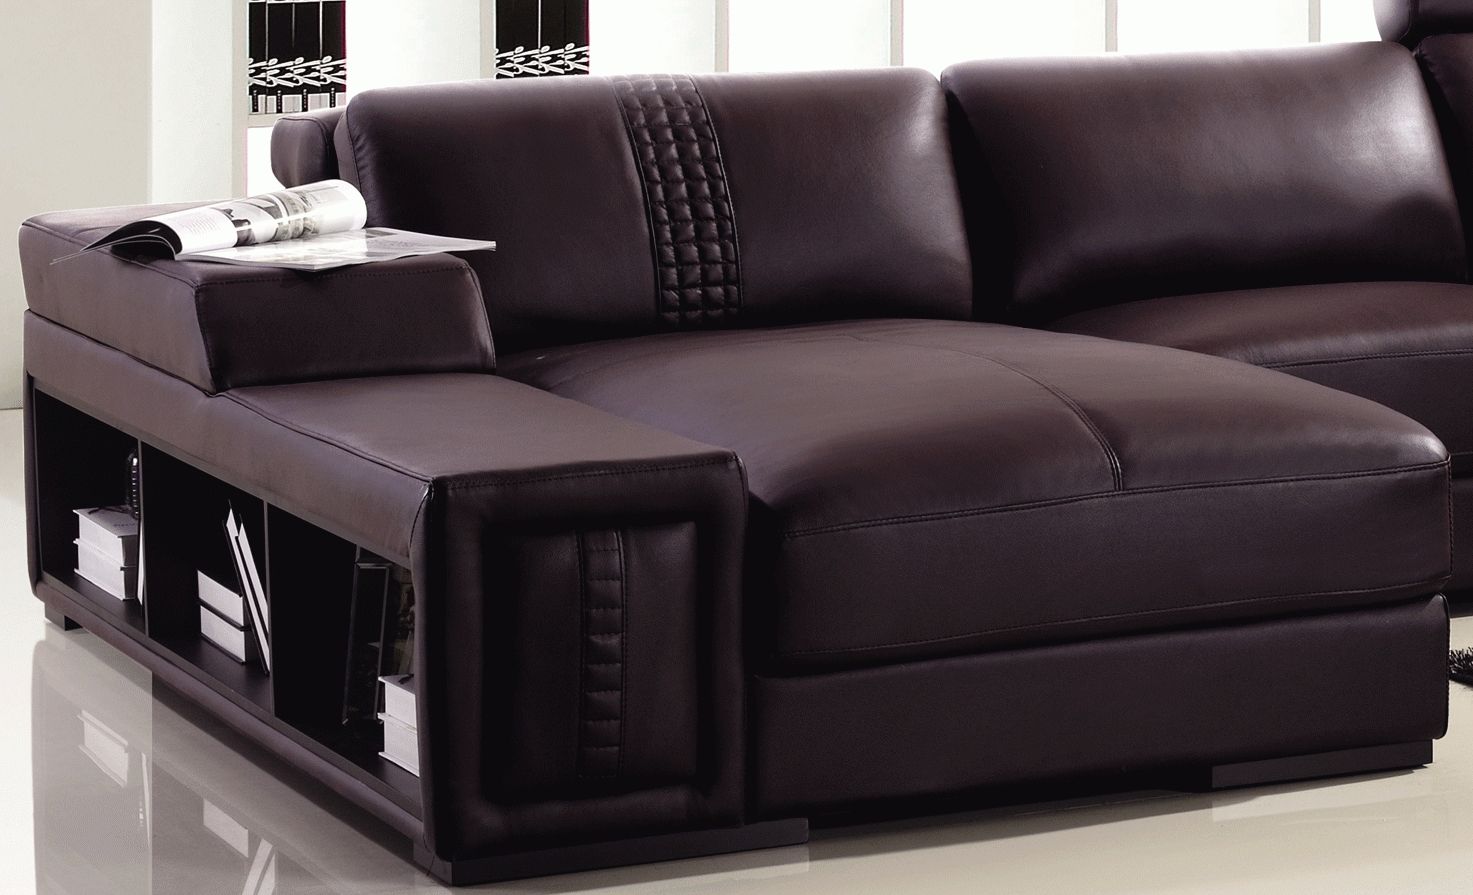 T132 Mini Modern Brown Leather Sectional Sofa Pertaining To Mini Sectional Sofas (View 4 of 20)